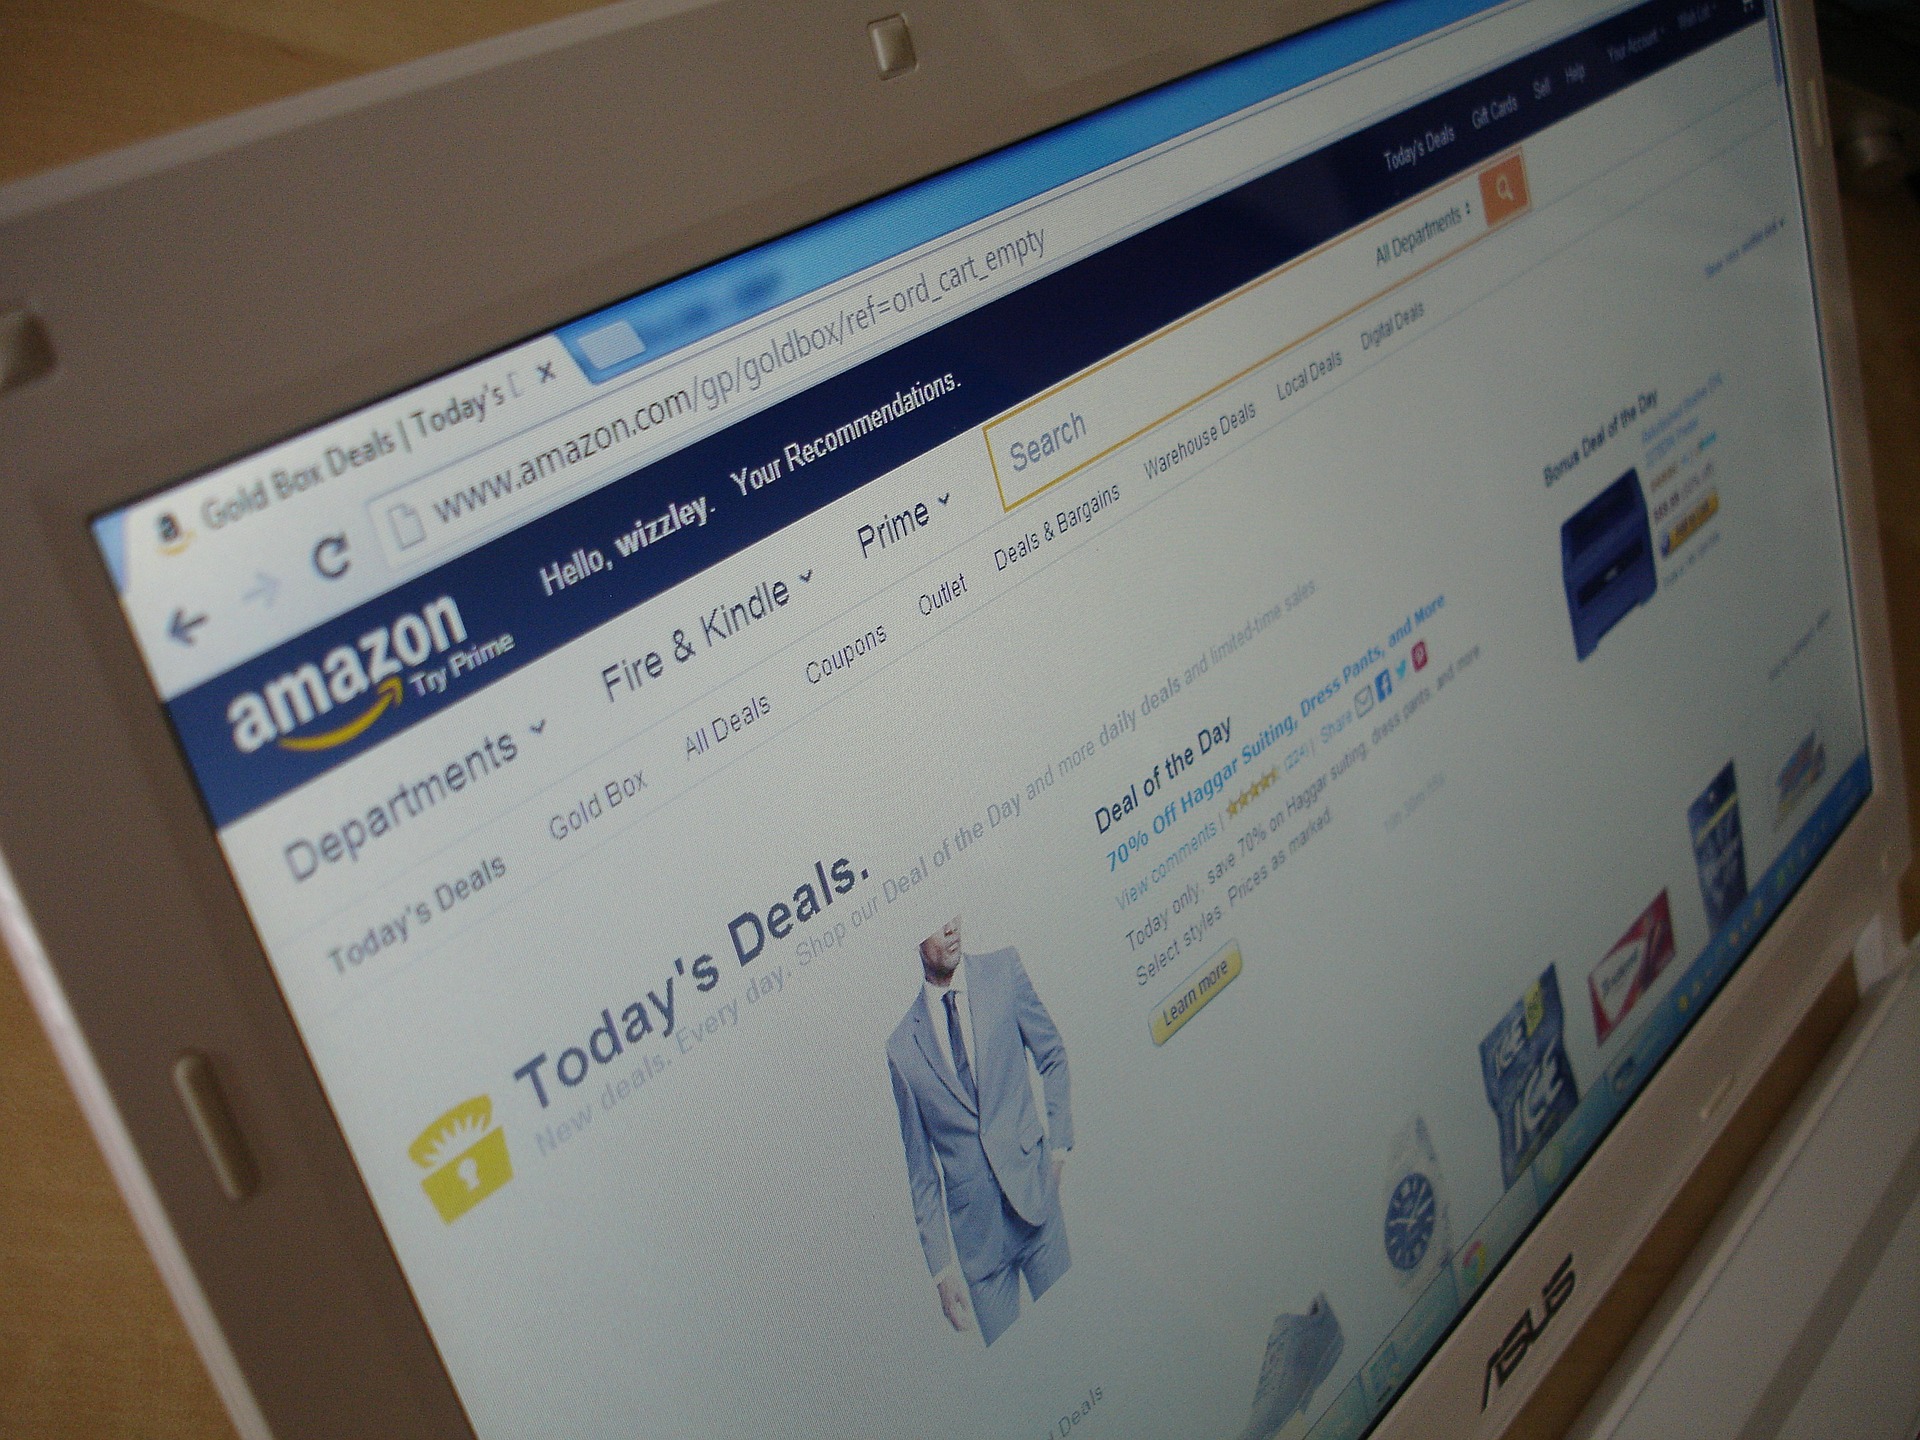 Top 5 Tips on How to Save Money on Amazon